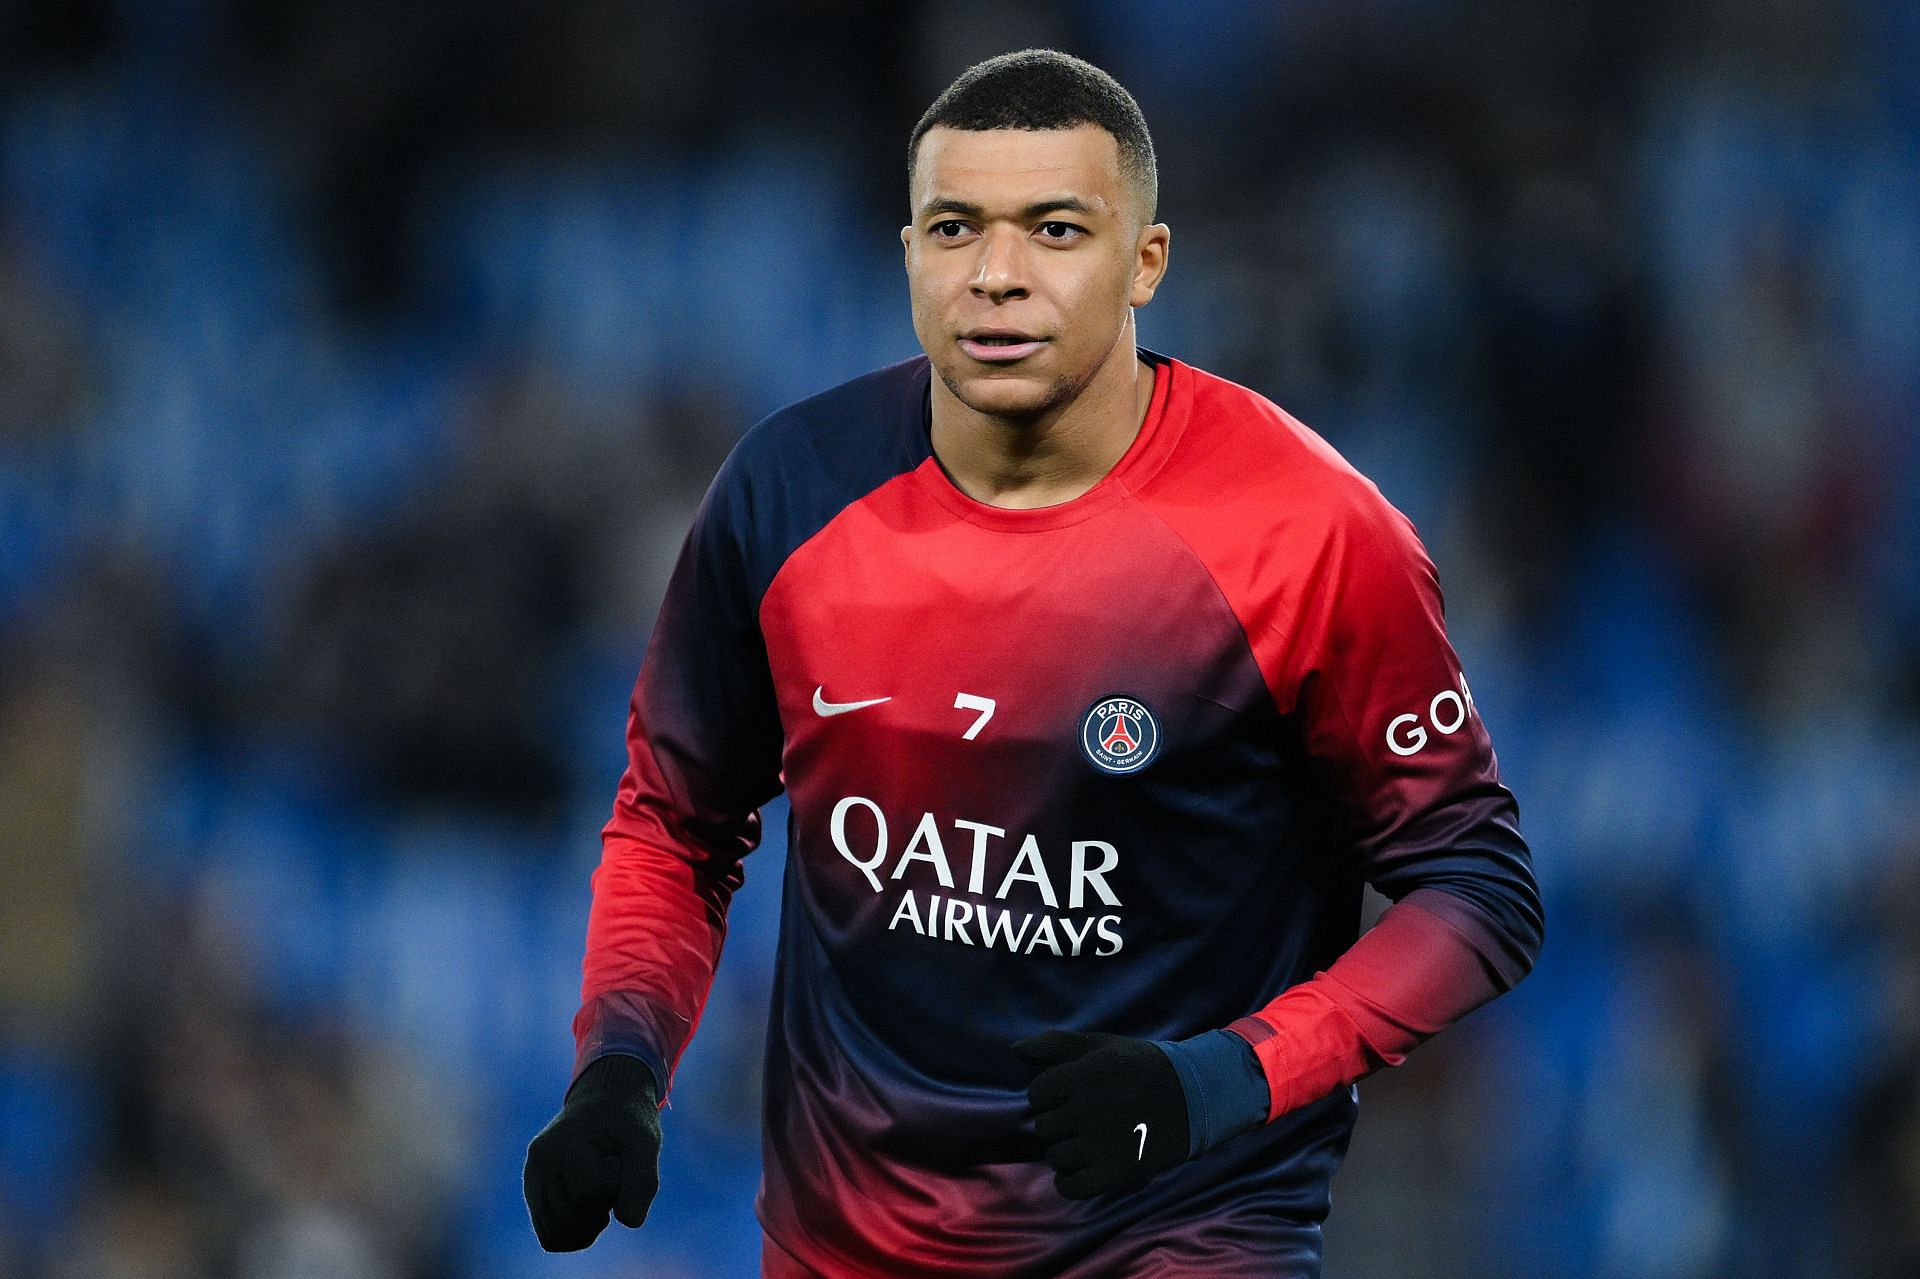 Kylian Mbappe is expected to join this summer.